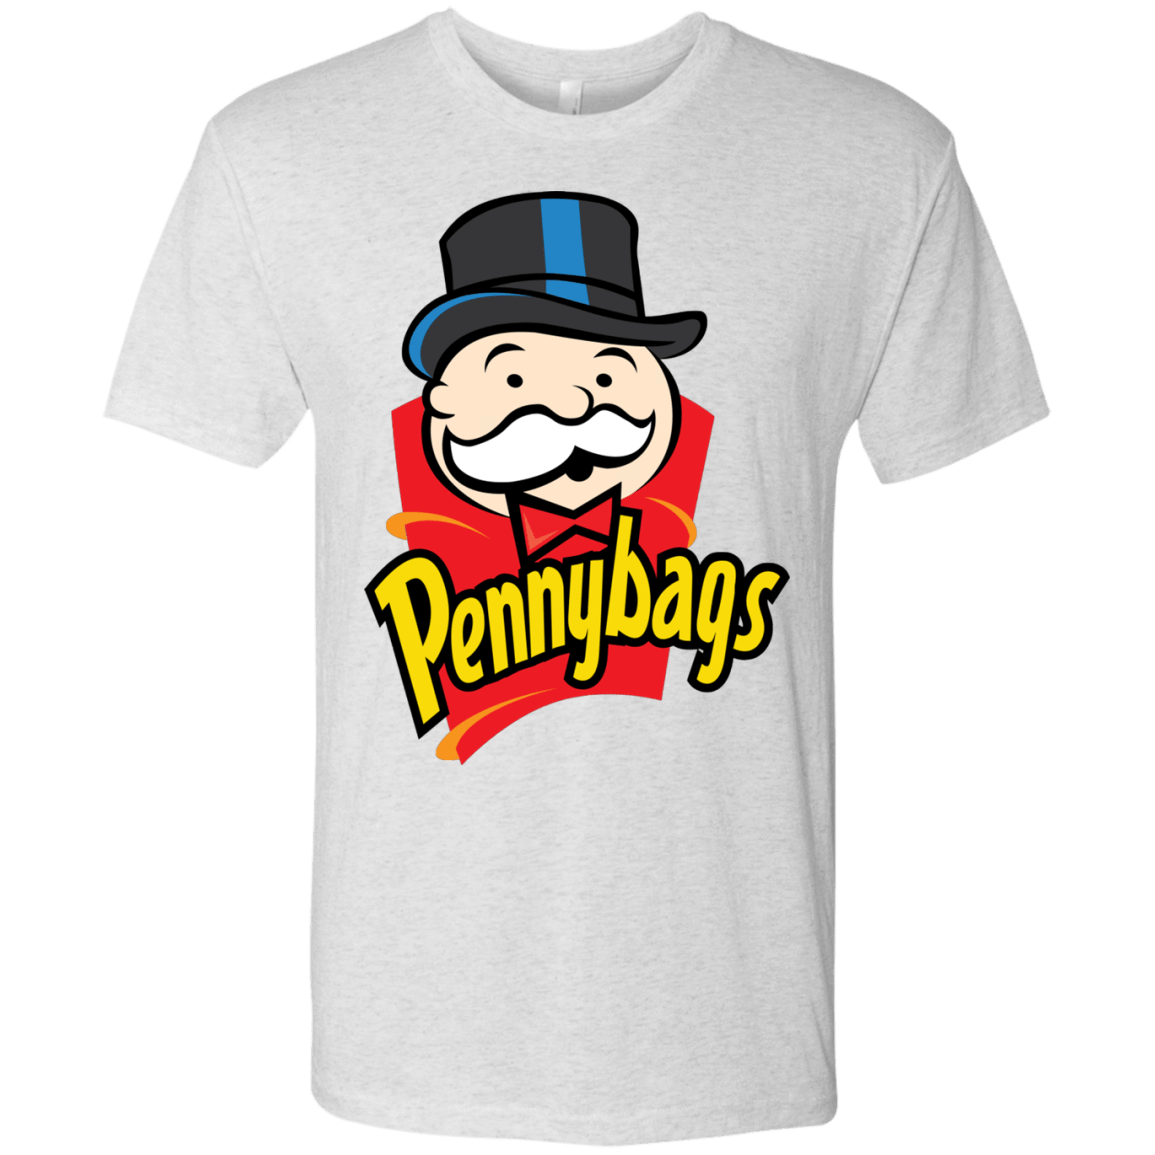 T-Shirts Heather White / S Pennybags Men's Triblend T-Shirt